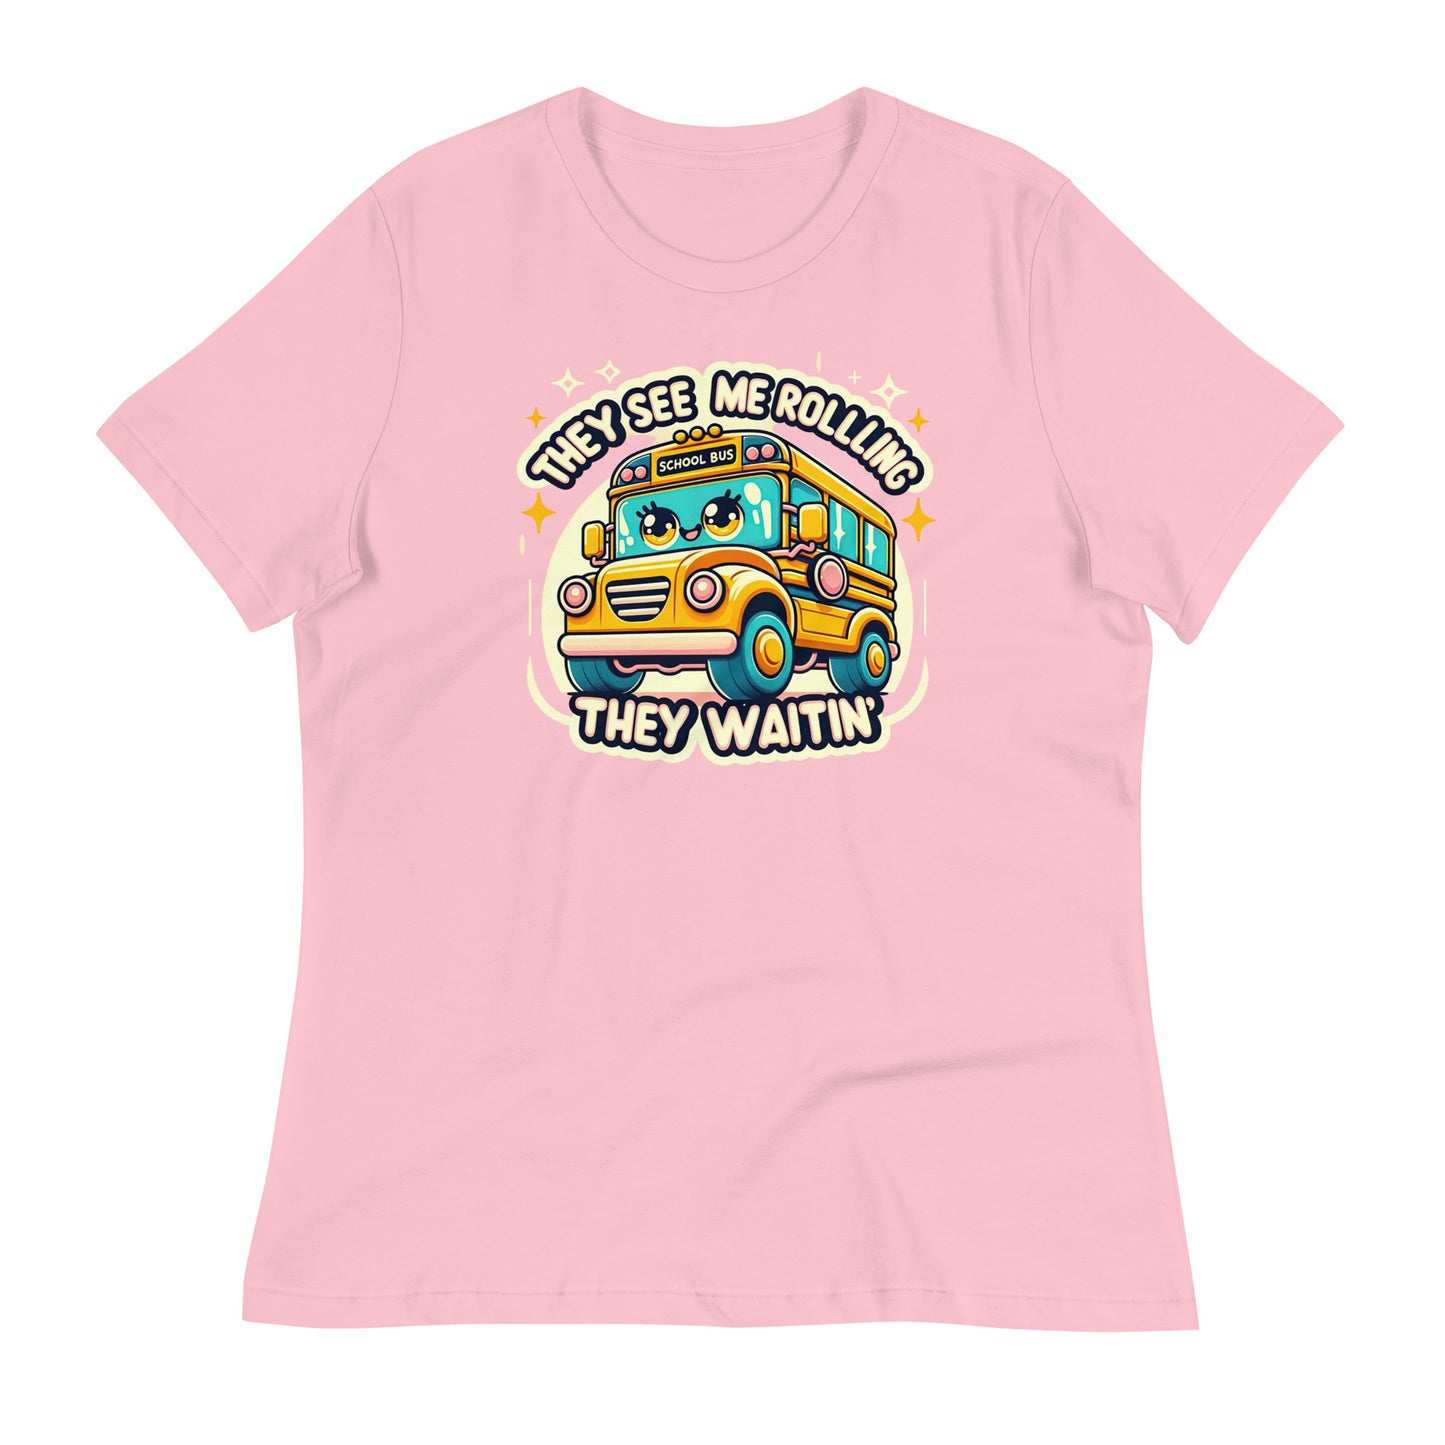 They See Me Rolling, They Waitin' Bus Driver Bella Canvas Relaxed Women's T-Shirt